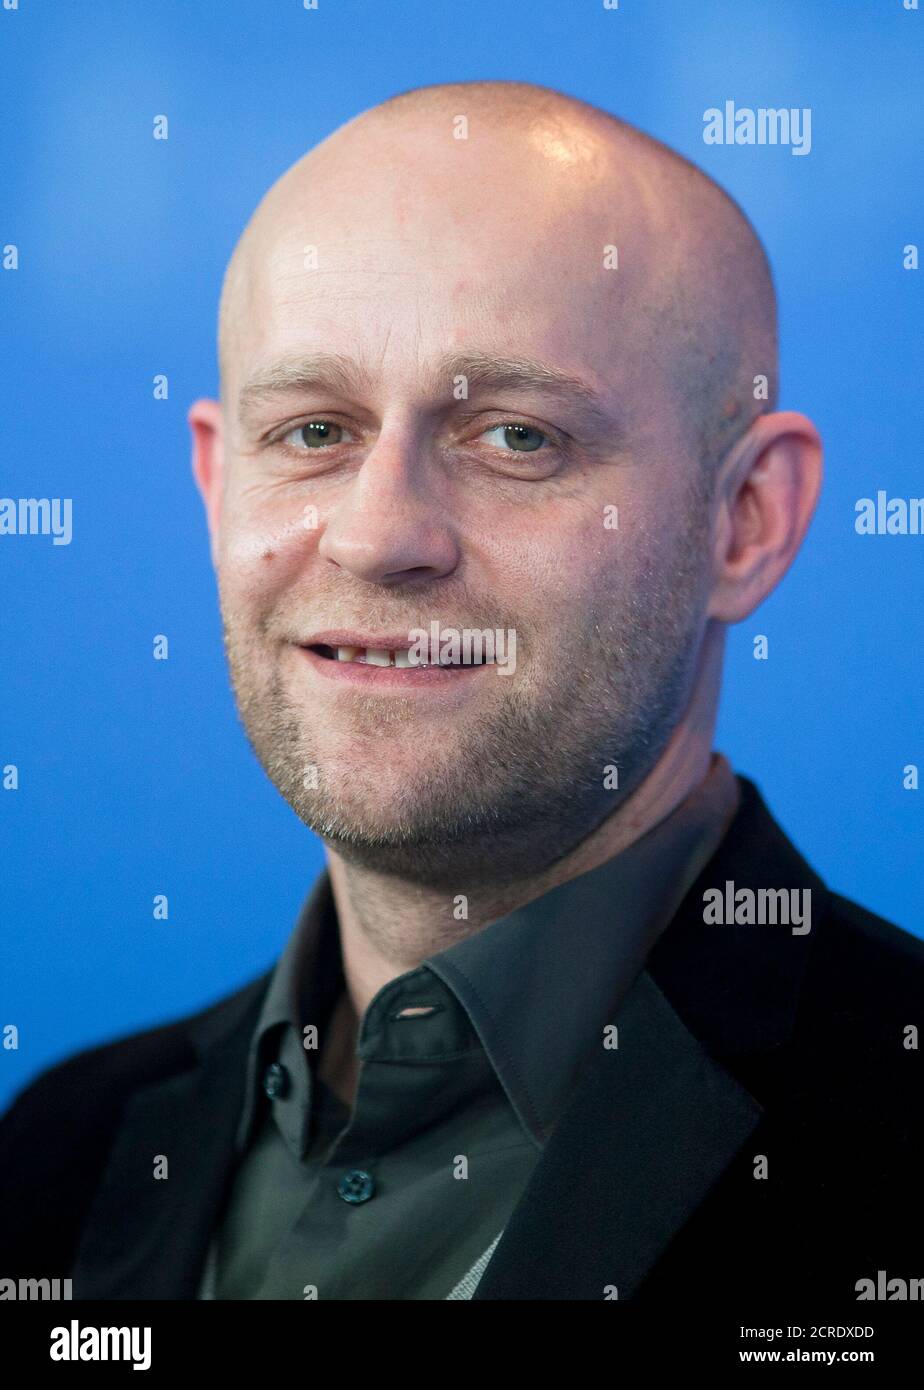 Cast member Juergen Vogel poses for pictures during a photocall to promote the movie 'Mercy' (Gnade) at Berlinale International Film Festival in Berlin February 16, 2012. REUTERS/Thomas Peter (GERMANY - Tags: ENTERTAINMENT HEADSHOT) Stock Photo